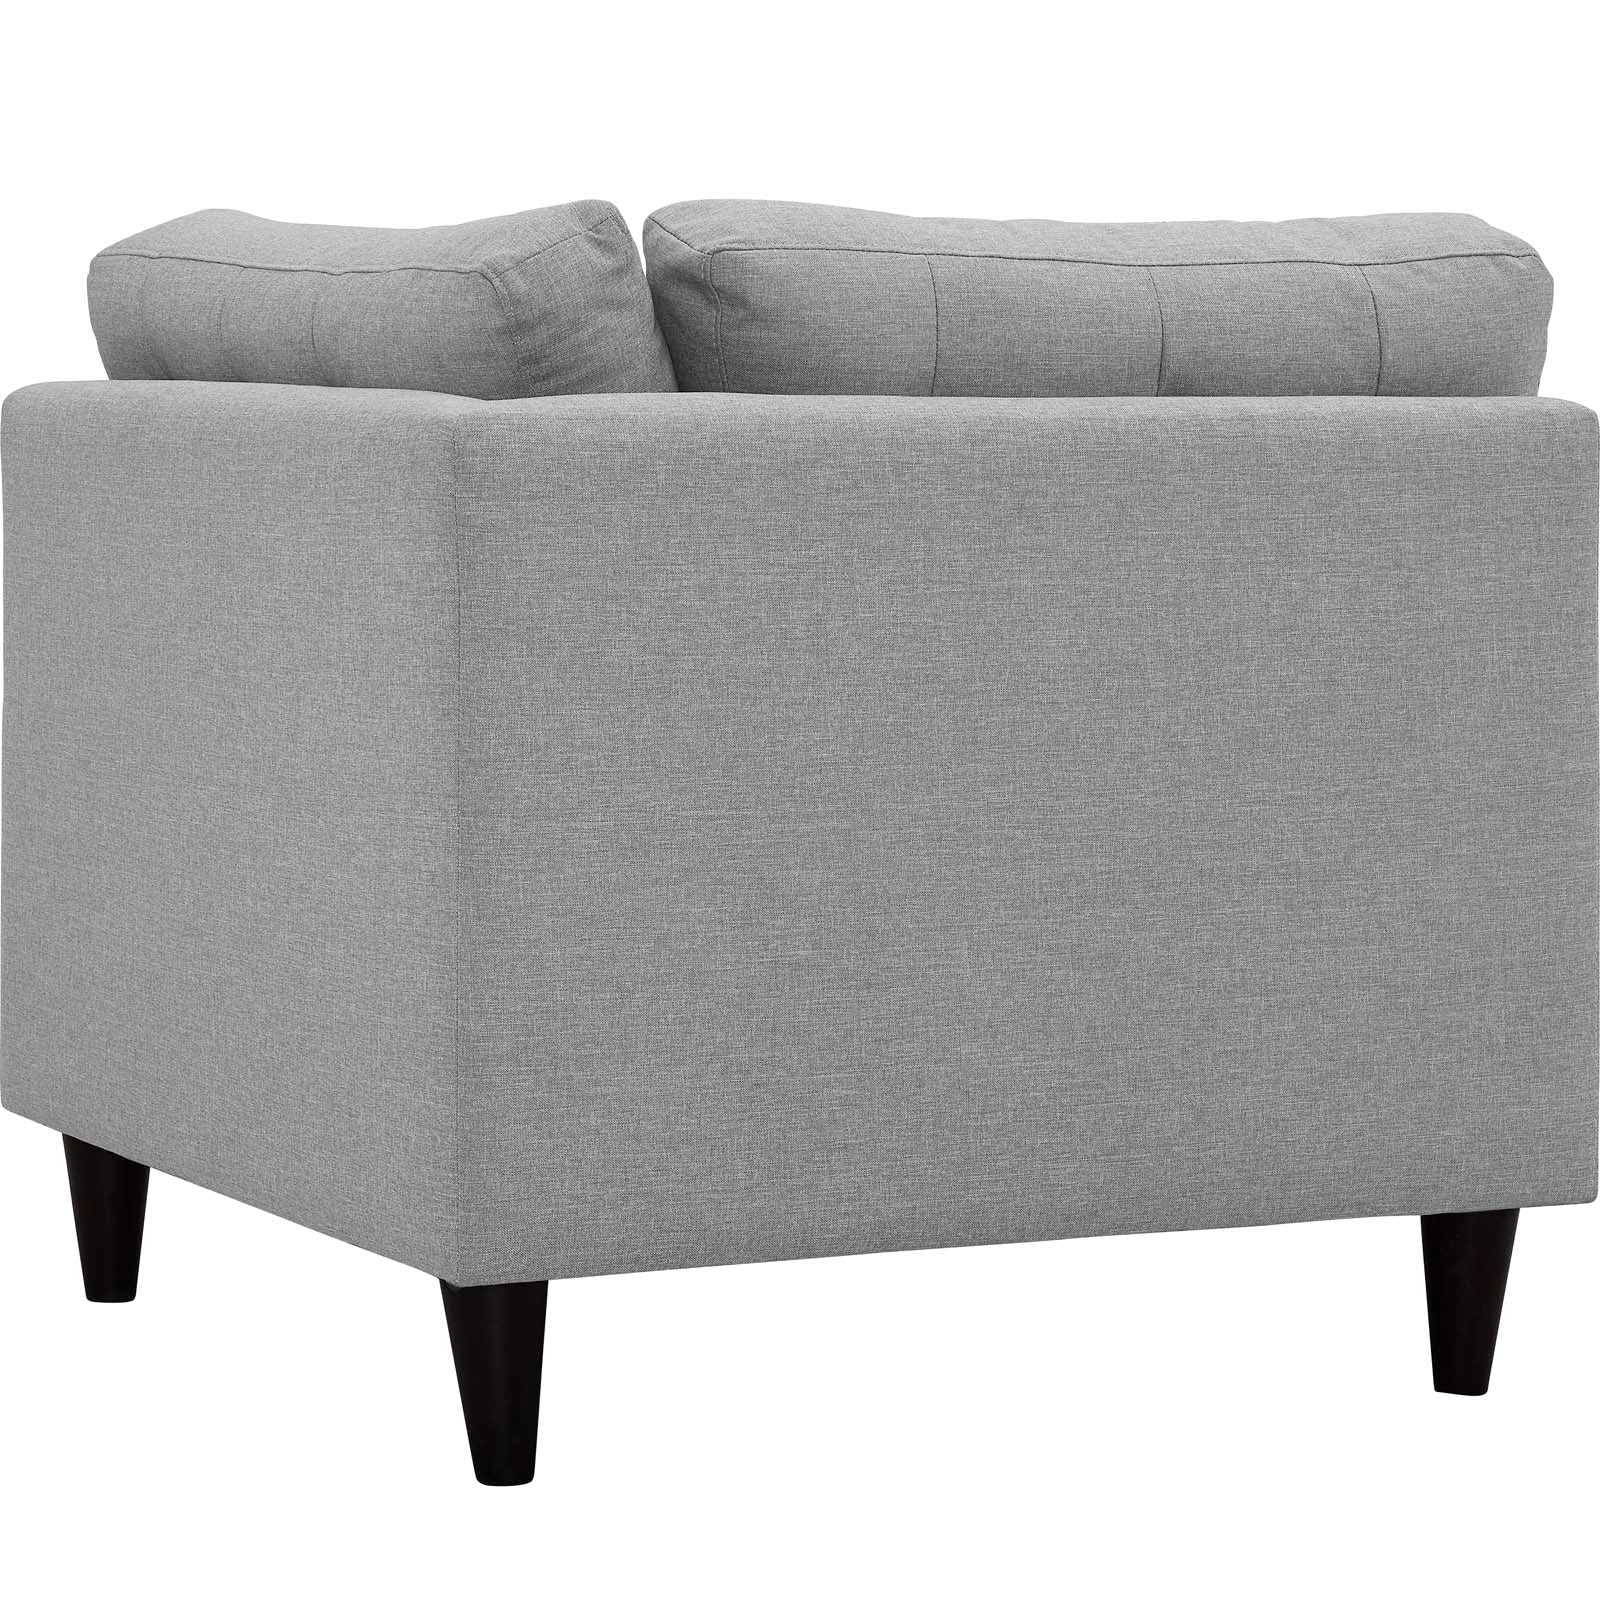 Modway Accent Chairs - Empress Upholstered Fabric Corner Sofa Light Gray